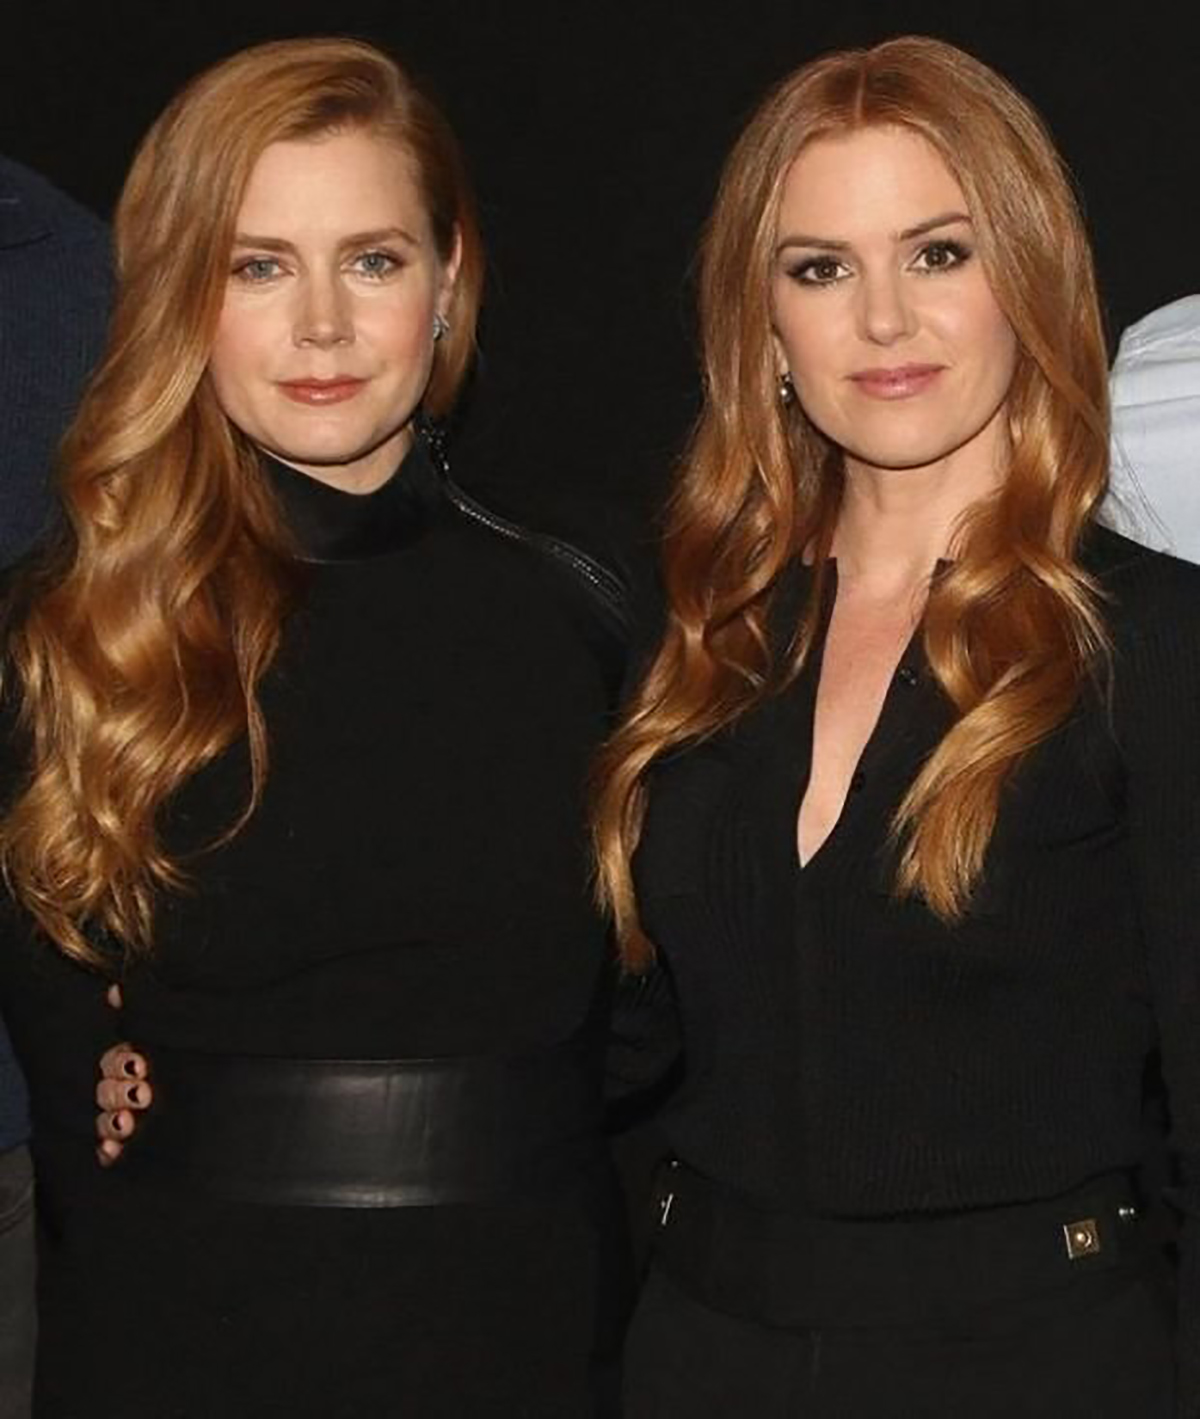 Amy Adams and Isla Fisher